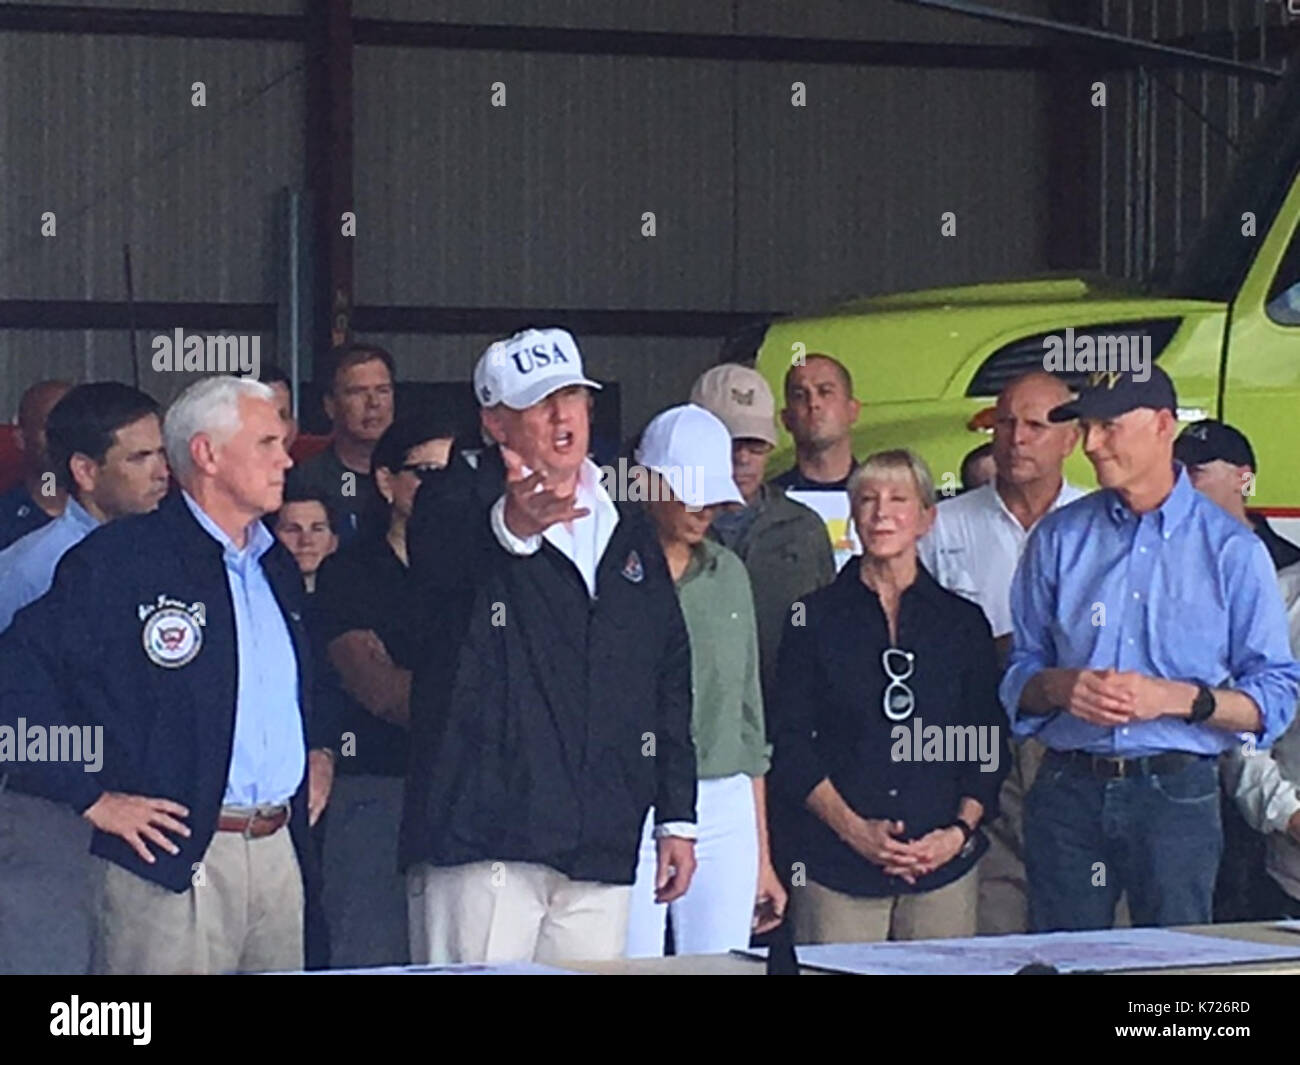 Fort Myers, FL, USA. 14th Sep, 2017. US President Donald Trump, with First Lady Melania Trump, Vice President Mike Pence and Florida Governor Rick Scott at Hangar Bay 3, Southwest Florida International Airport Fort Myers, Florida prior to their tour of the Naples Estates neighborhood that was damaged during Hurricane Irma September 14, 2017 in Naples, Florida. Credit: Mpi122/Media Punch/Alamy Live News Stock Photo